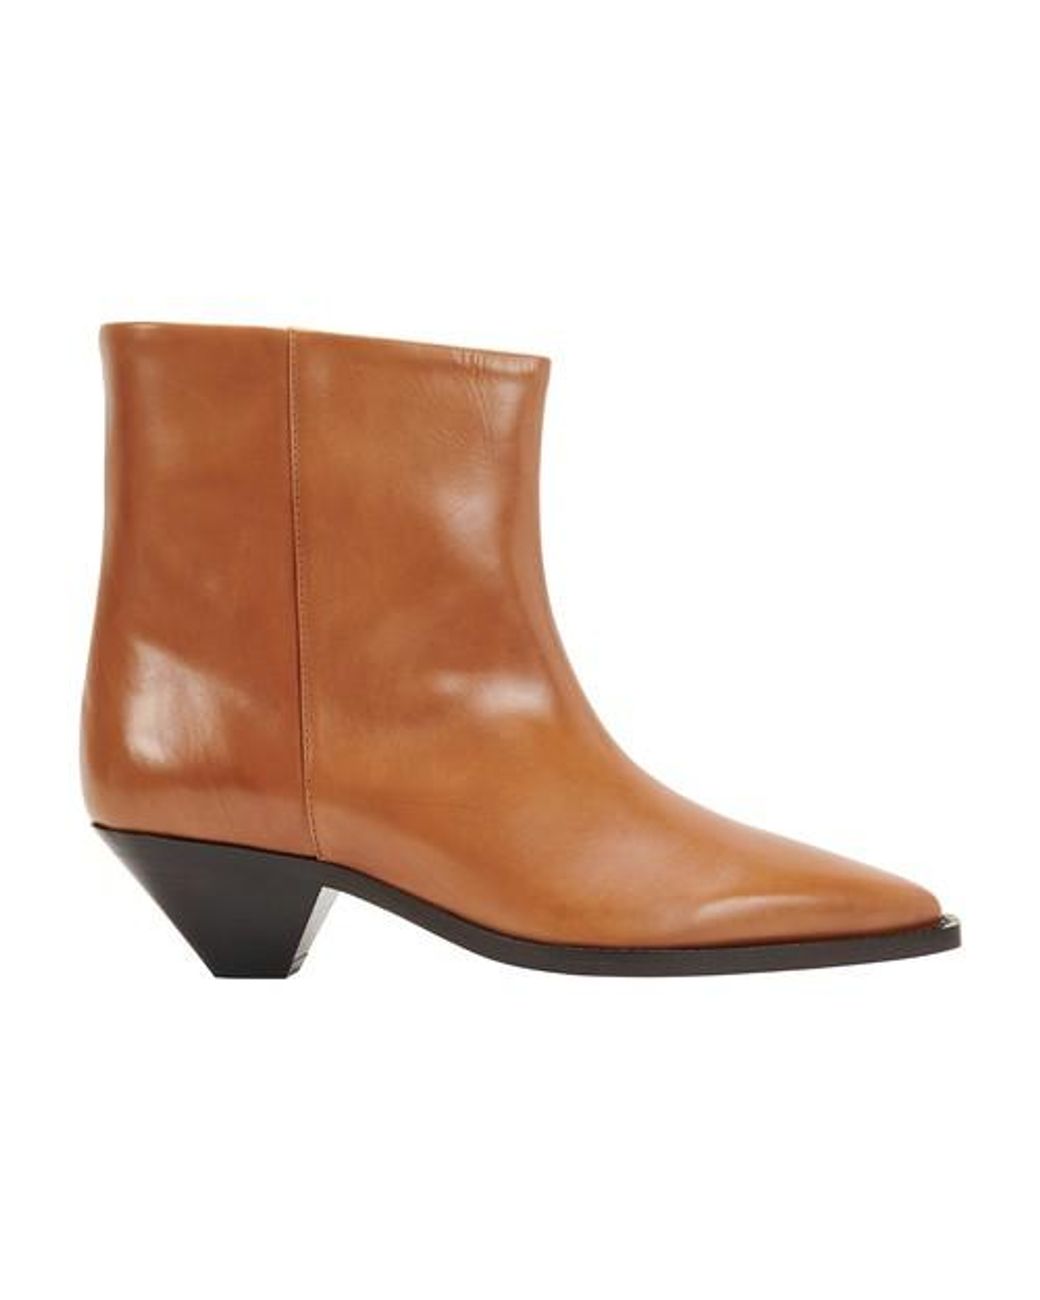 Isabel Marant Imori Ankle Boots in Natural | Lyst UK